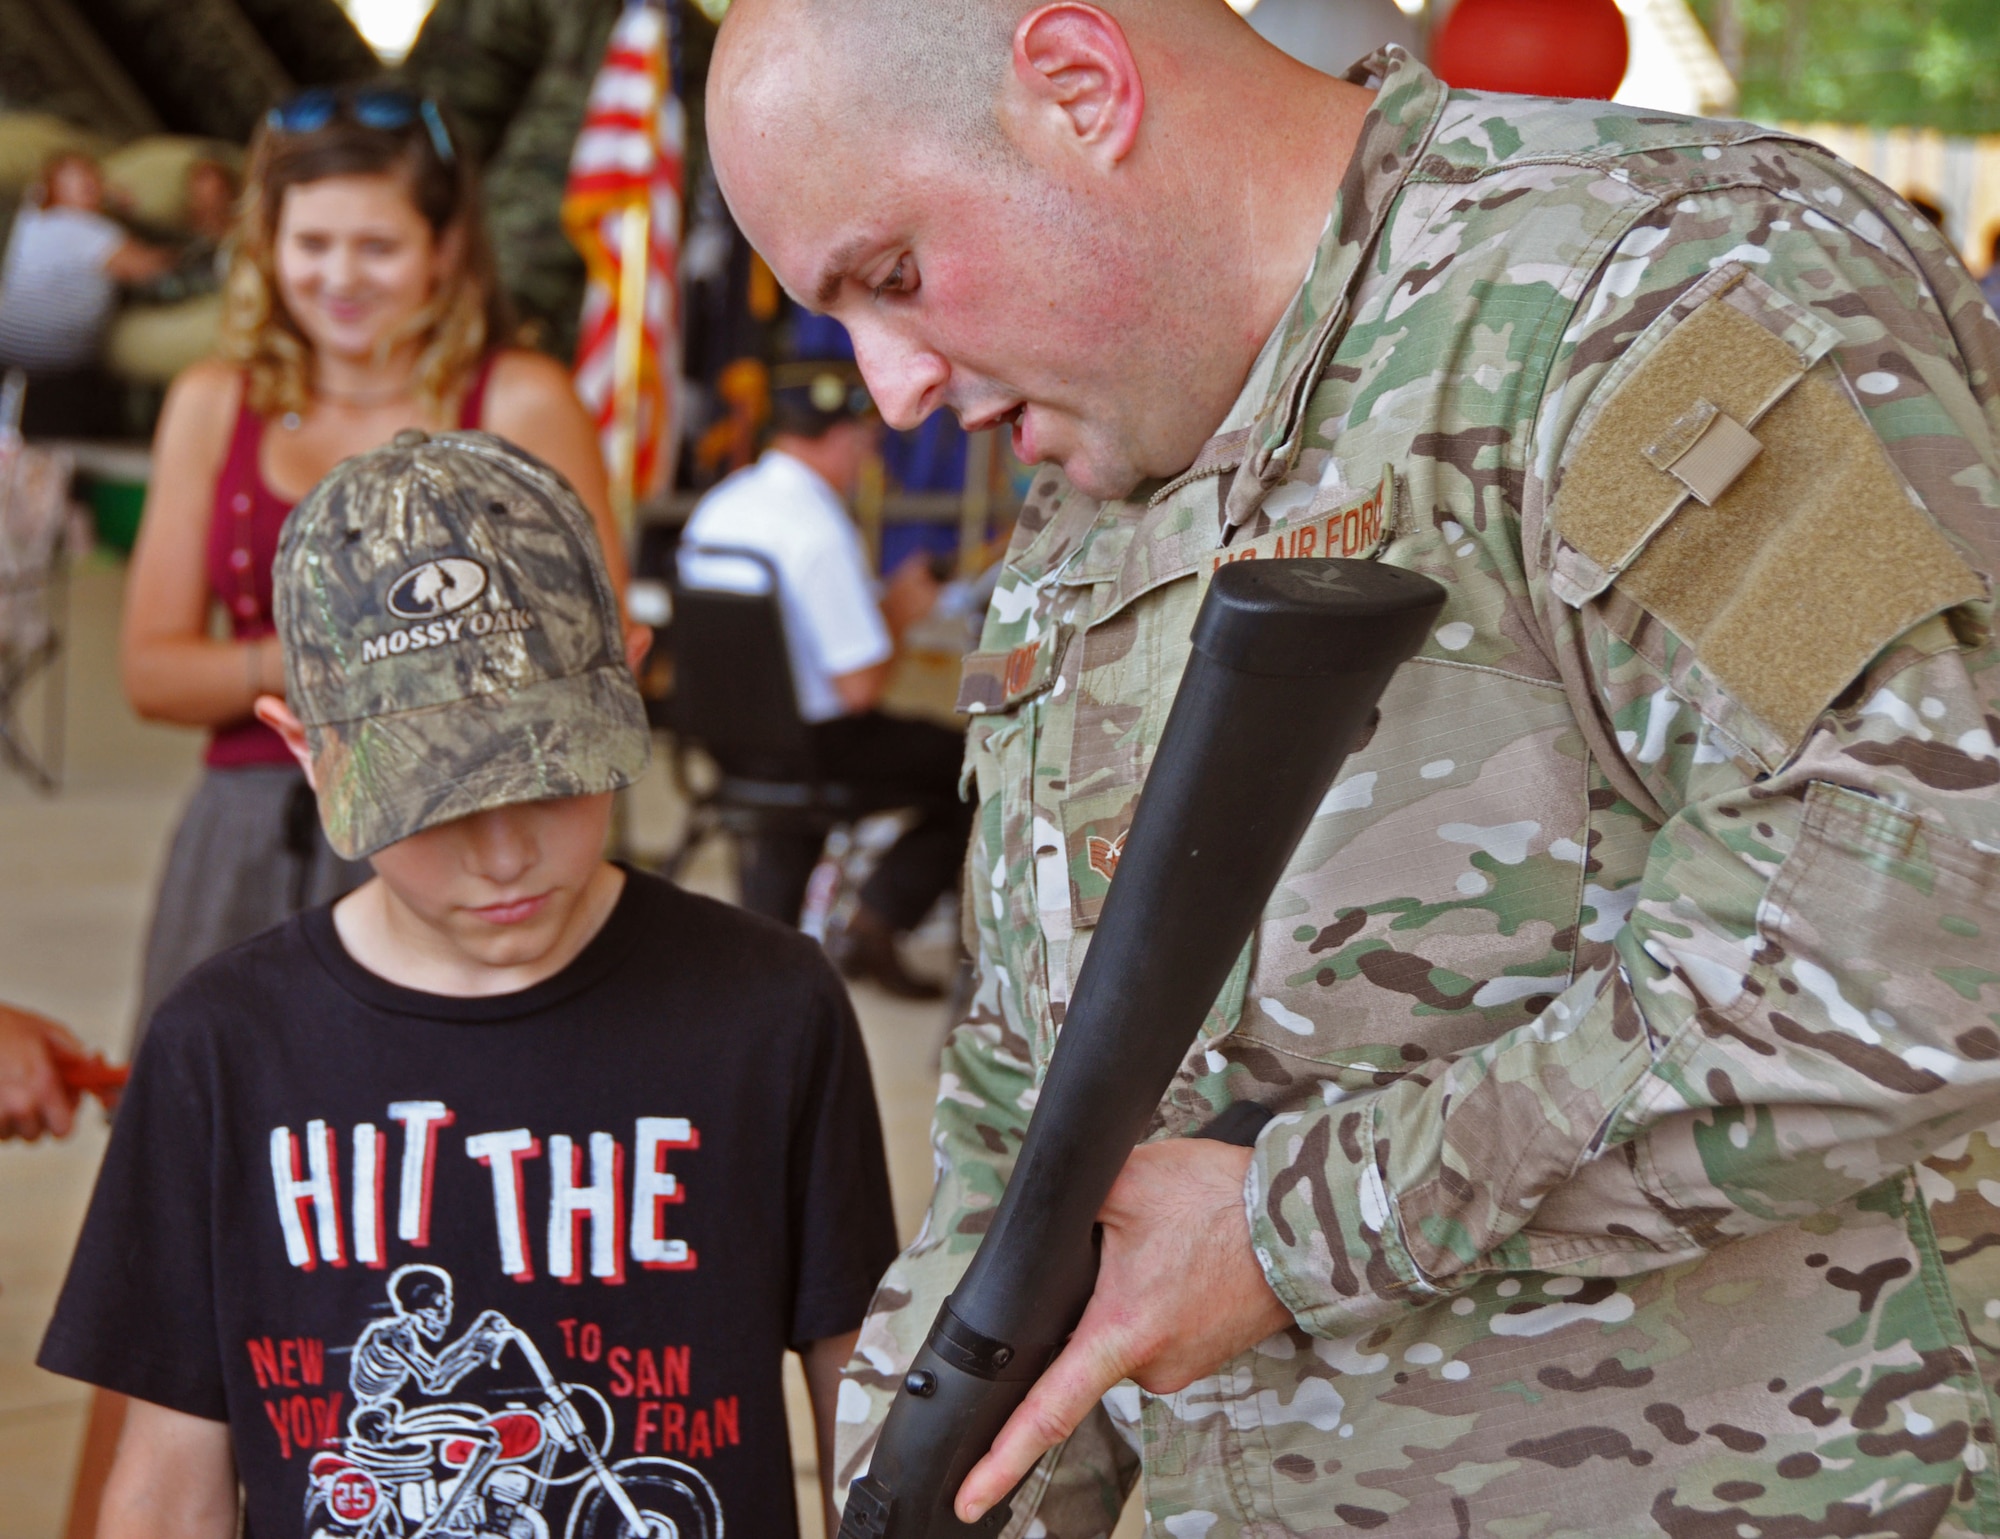 Staff Sgt. Brian Ploof, 919th Special Operations Security Forces Squadron, educates a young visitor about the M-870 shotgun at the Military Appreciation Recognition Celebration in Crestview, Fla., May 20, 2017. The annual event affords a unique opportunity for Crestview area citizens to meet military members and thank them for their service in national defense. (U.S. Air Force photo/Dan Neely)